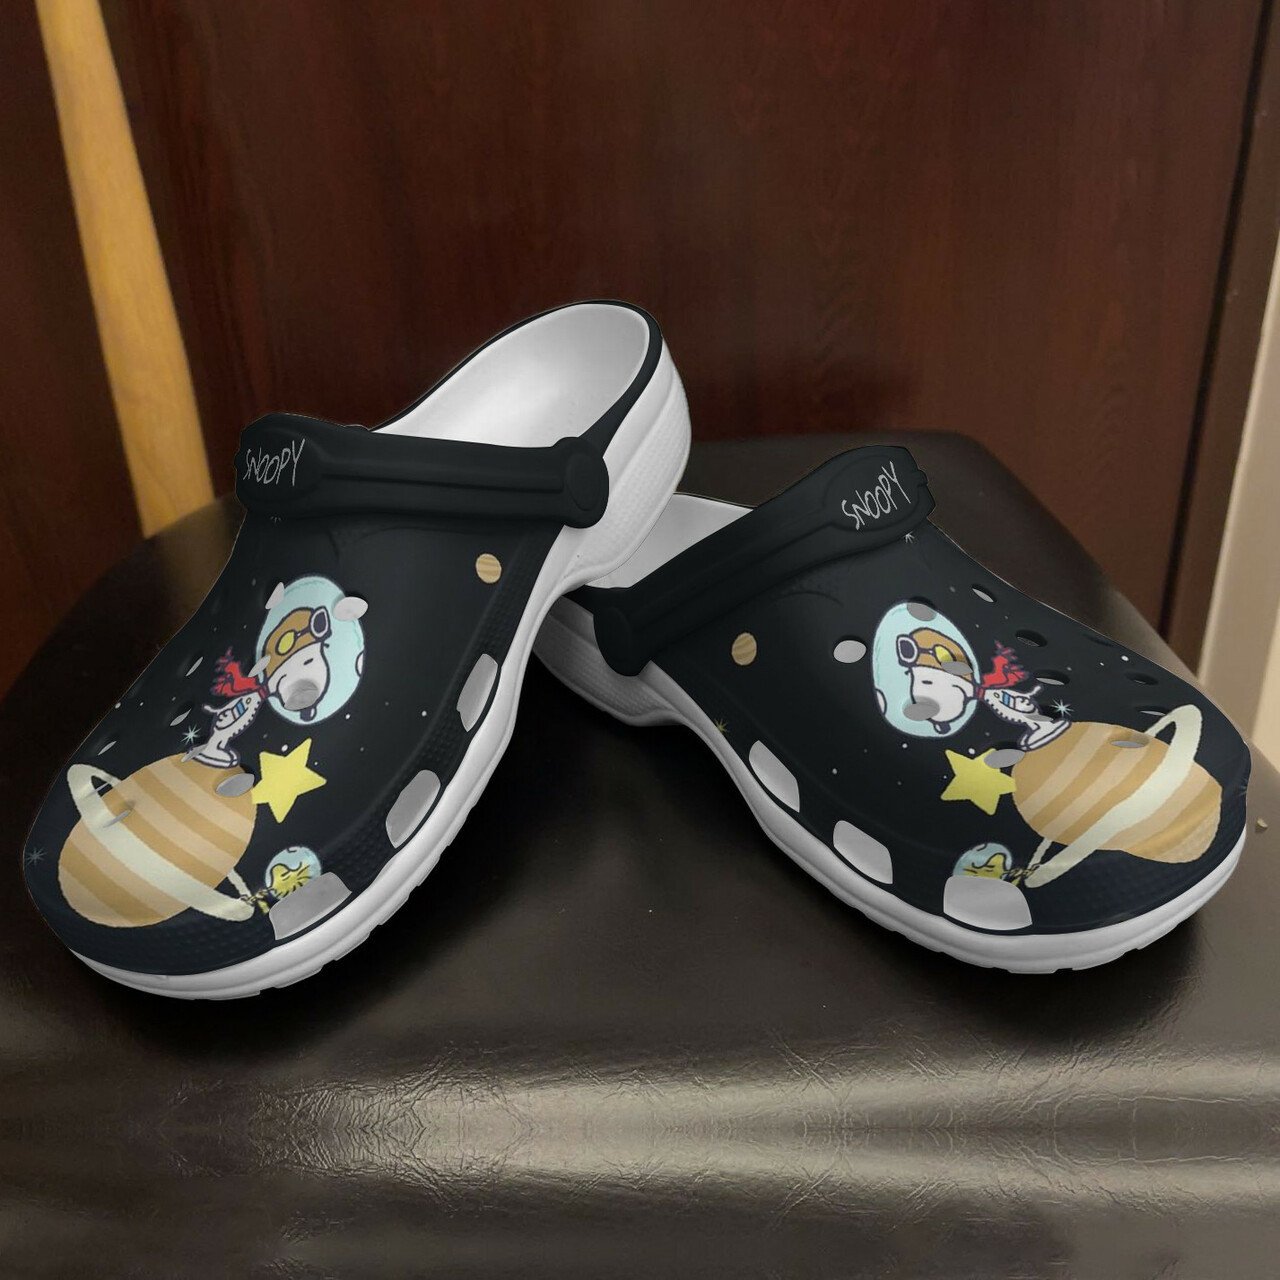 Peanuts Snoopy On Night Planet Crocss Crocband Clog Comfortable Water Shoes